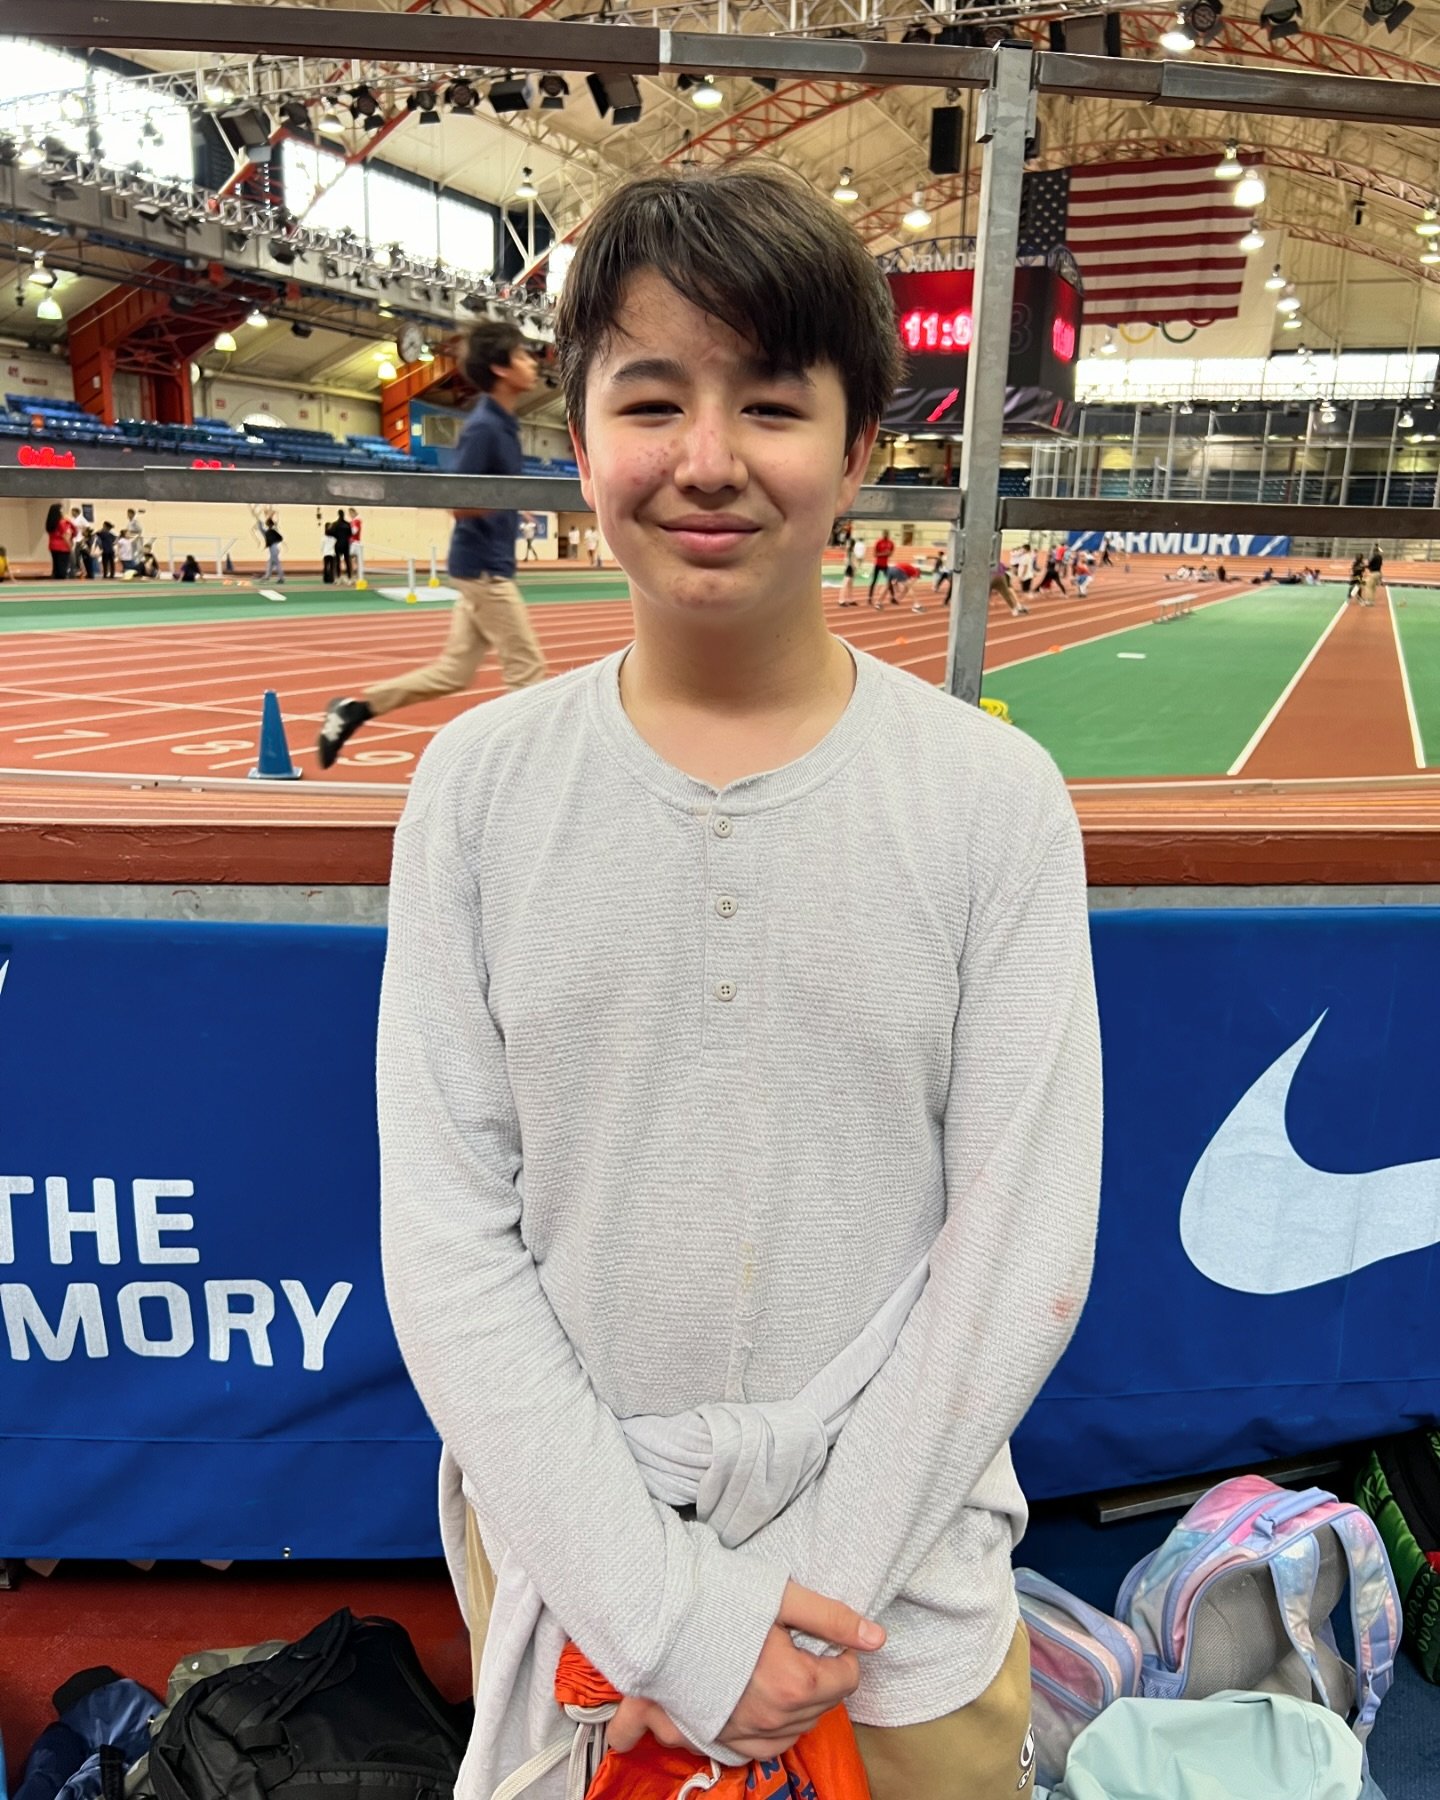 Huge congrats to Odin!
This incredible 8th grader just landed a spot at the prestigious Brooklyn Latin School!  Odin has been a shining star at The Armory since 5th grade, dedicating himself to his studies and excelling both on the track (running wit